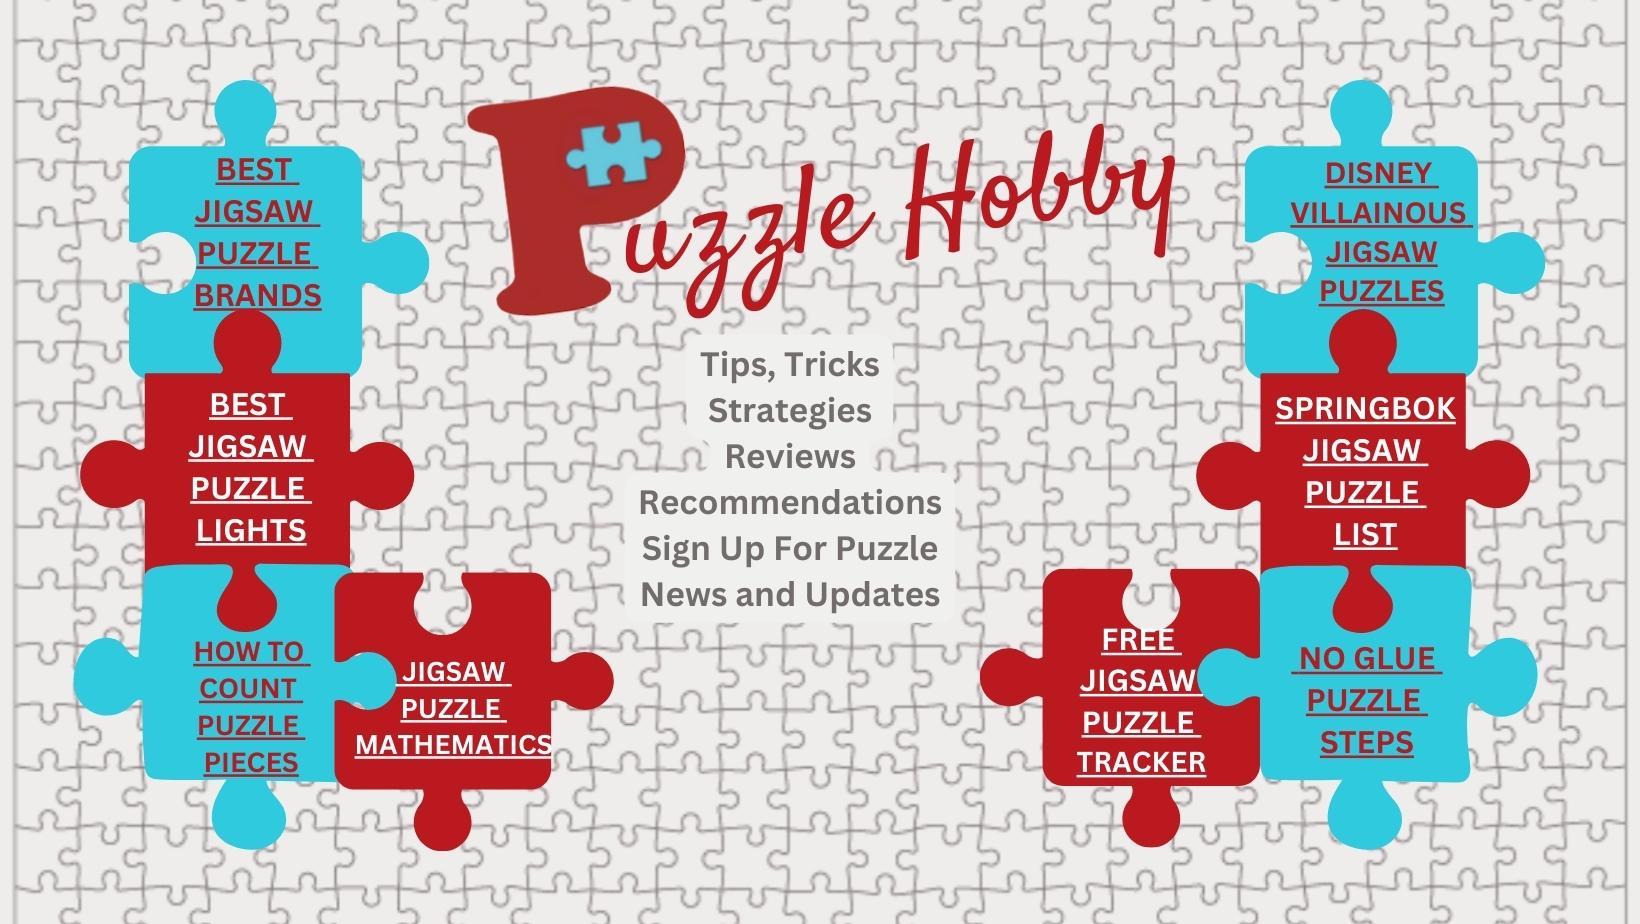 Jigsaw Puzzle Glue Clear, for Adult Kids for up to 2000 Piece